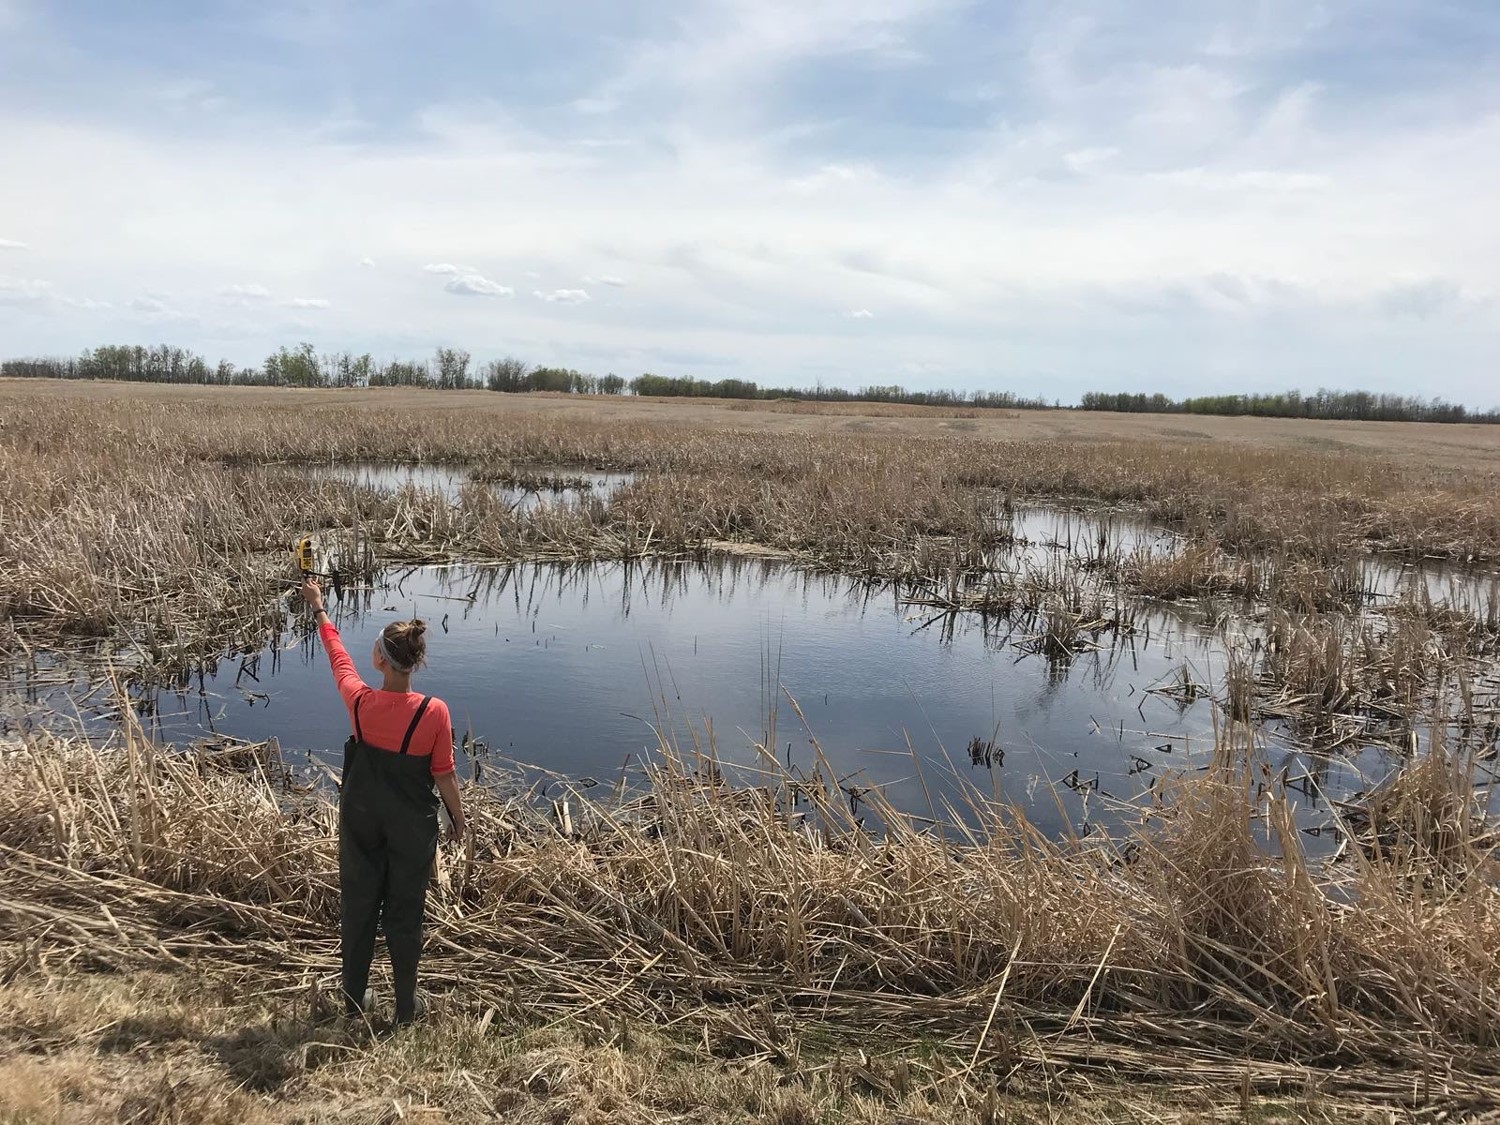 One of many wetland visits during the spring 2018 field season. Photo credit A. Hergott.